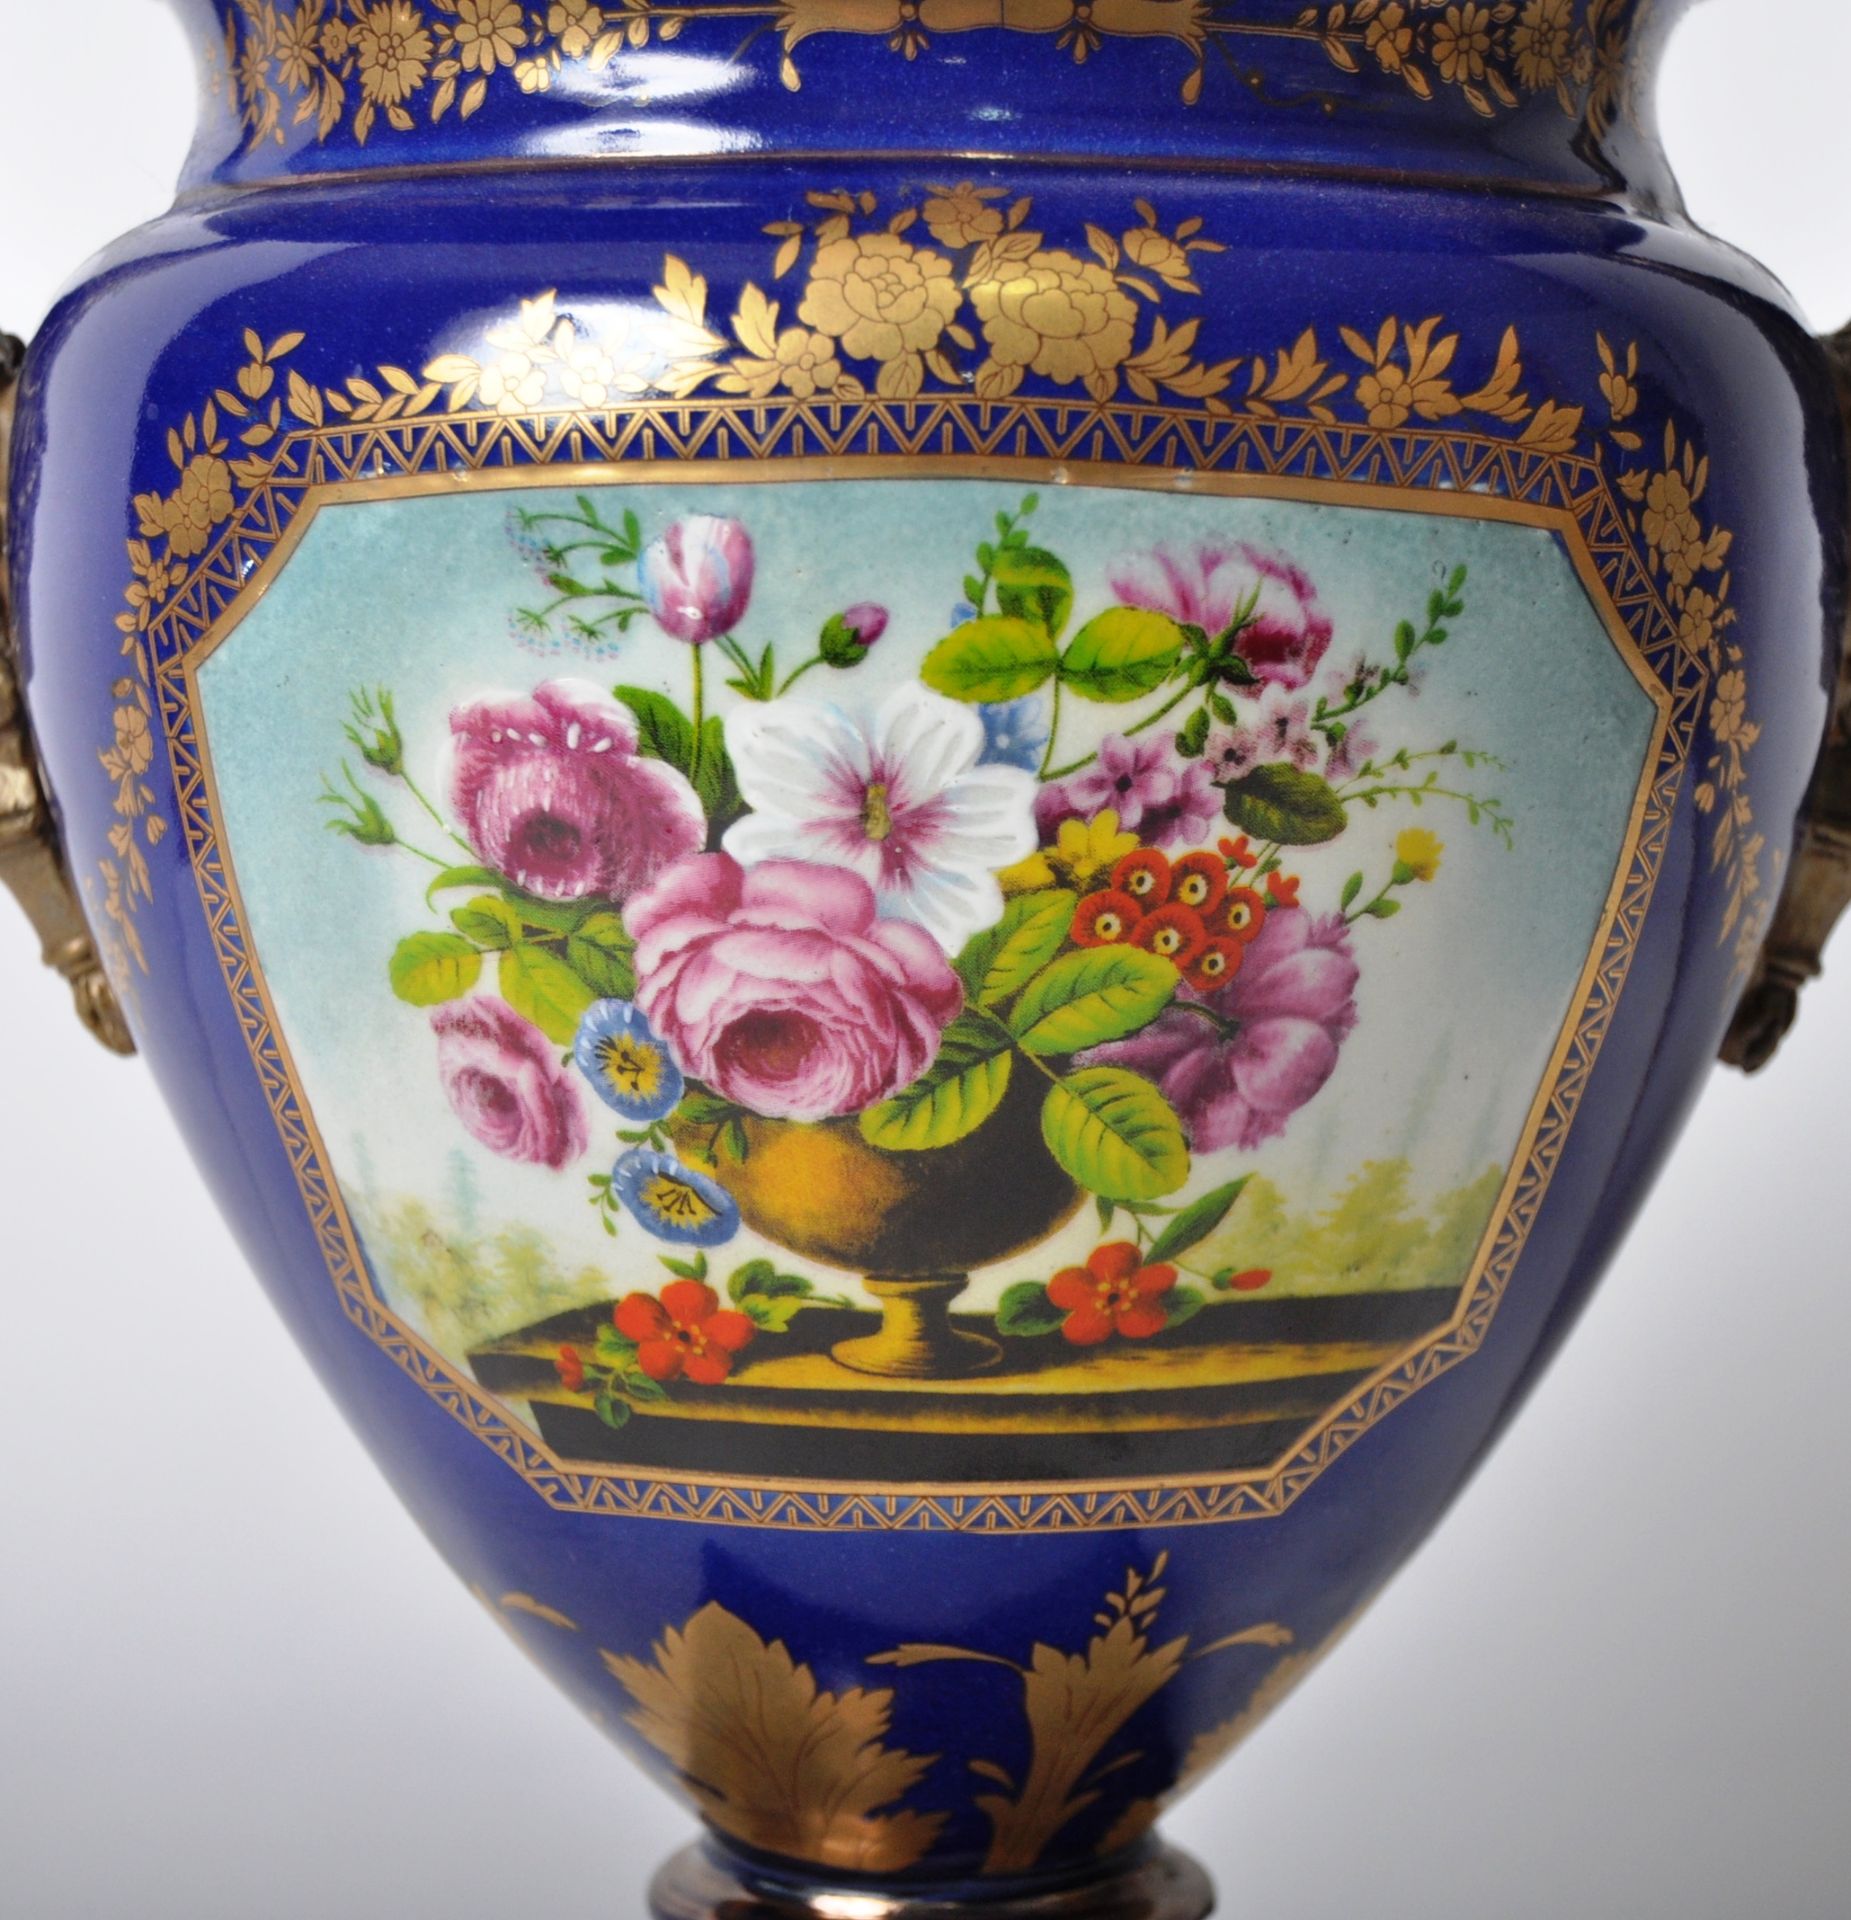 EARLY 20TH CENTURY PORCELAIN LIDDED URN - Image 4 of 11